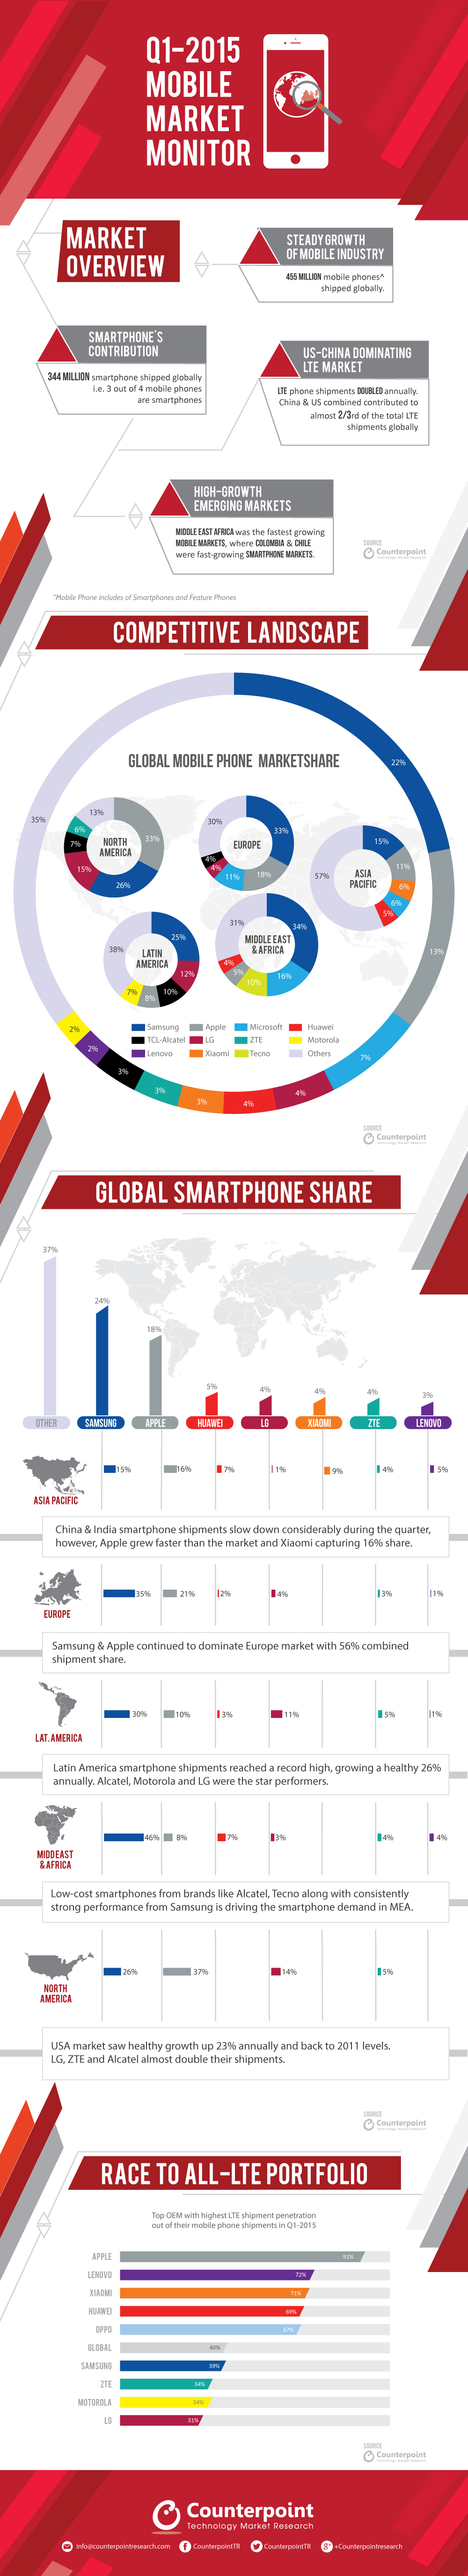 Infographic-Q1-2015-Mobile-Market-Monitor